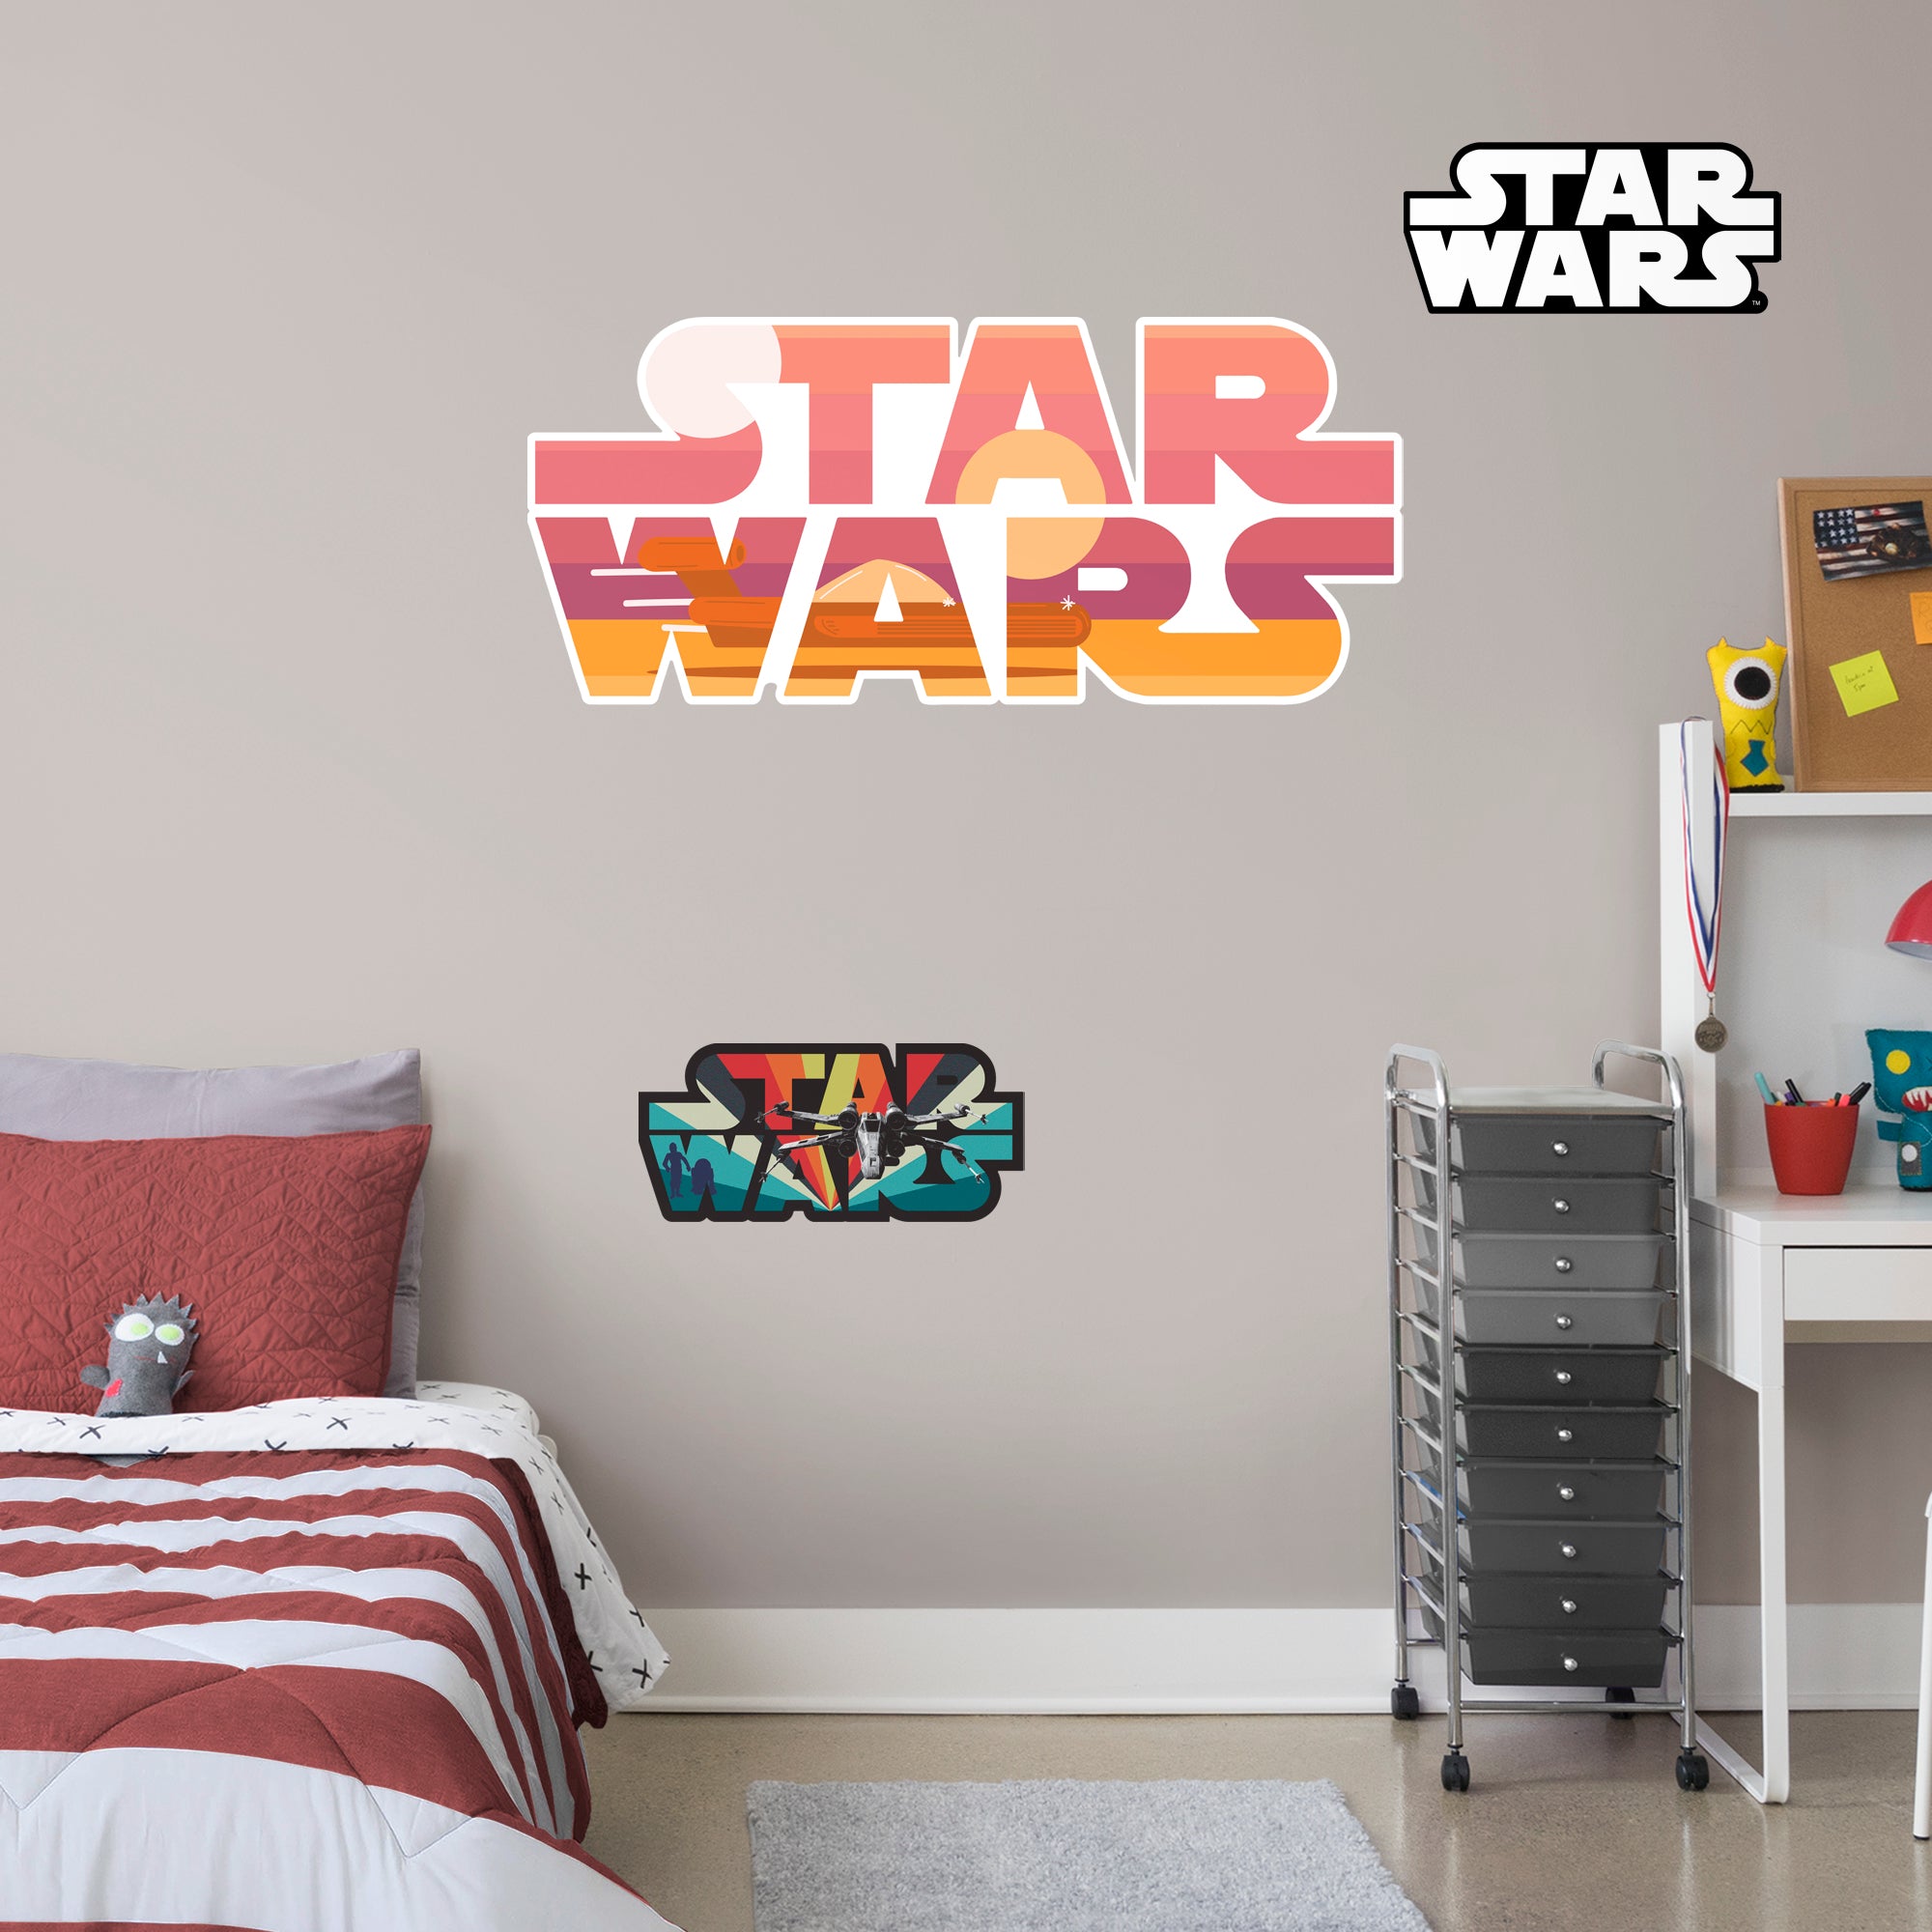 Tattooine Logo - Officially Licensed Star Wars Removable Wall Decal Giant Logo (51"W x 23"H) by Fathead | Vinyl